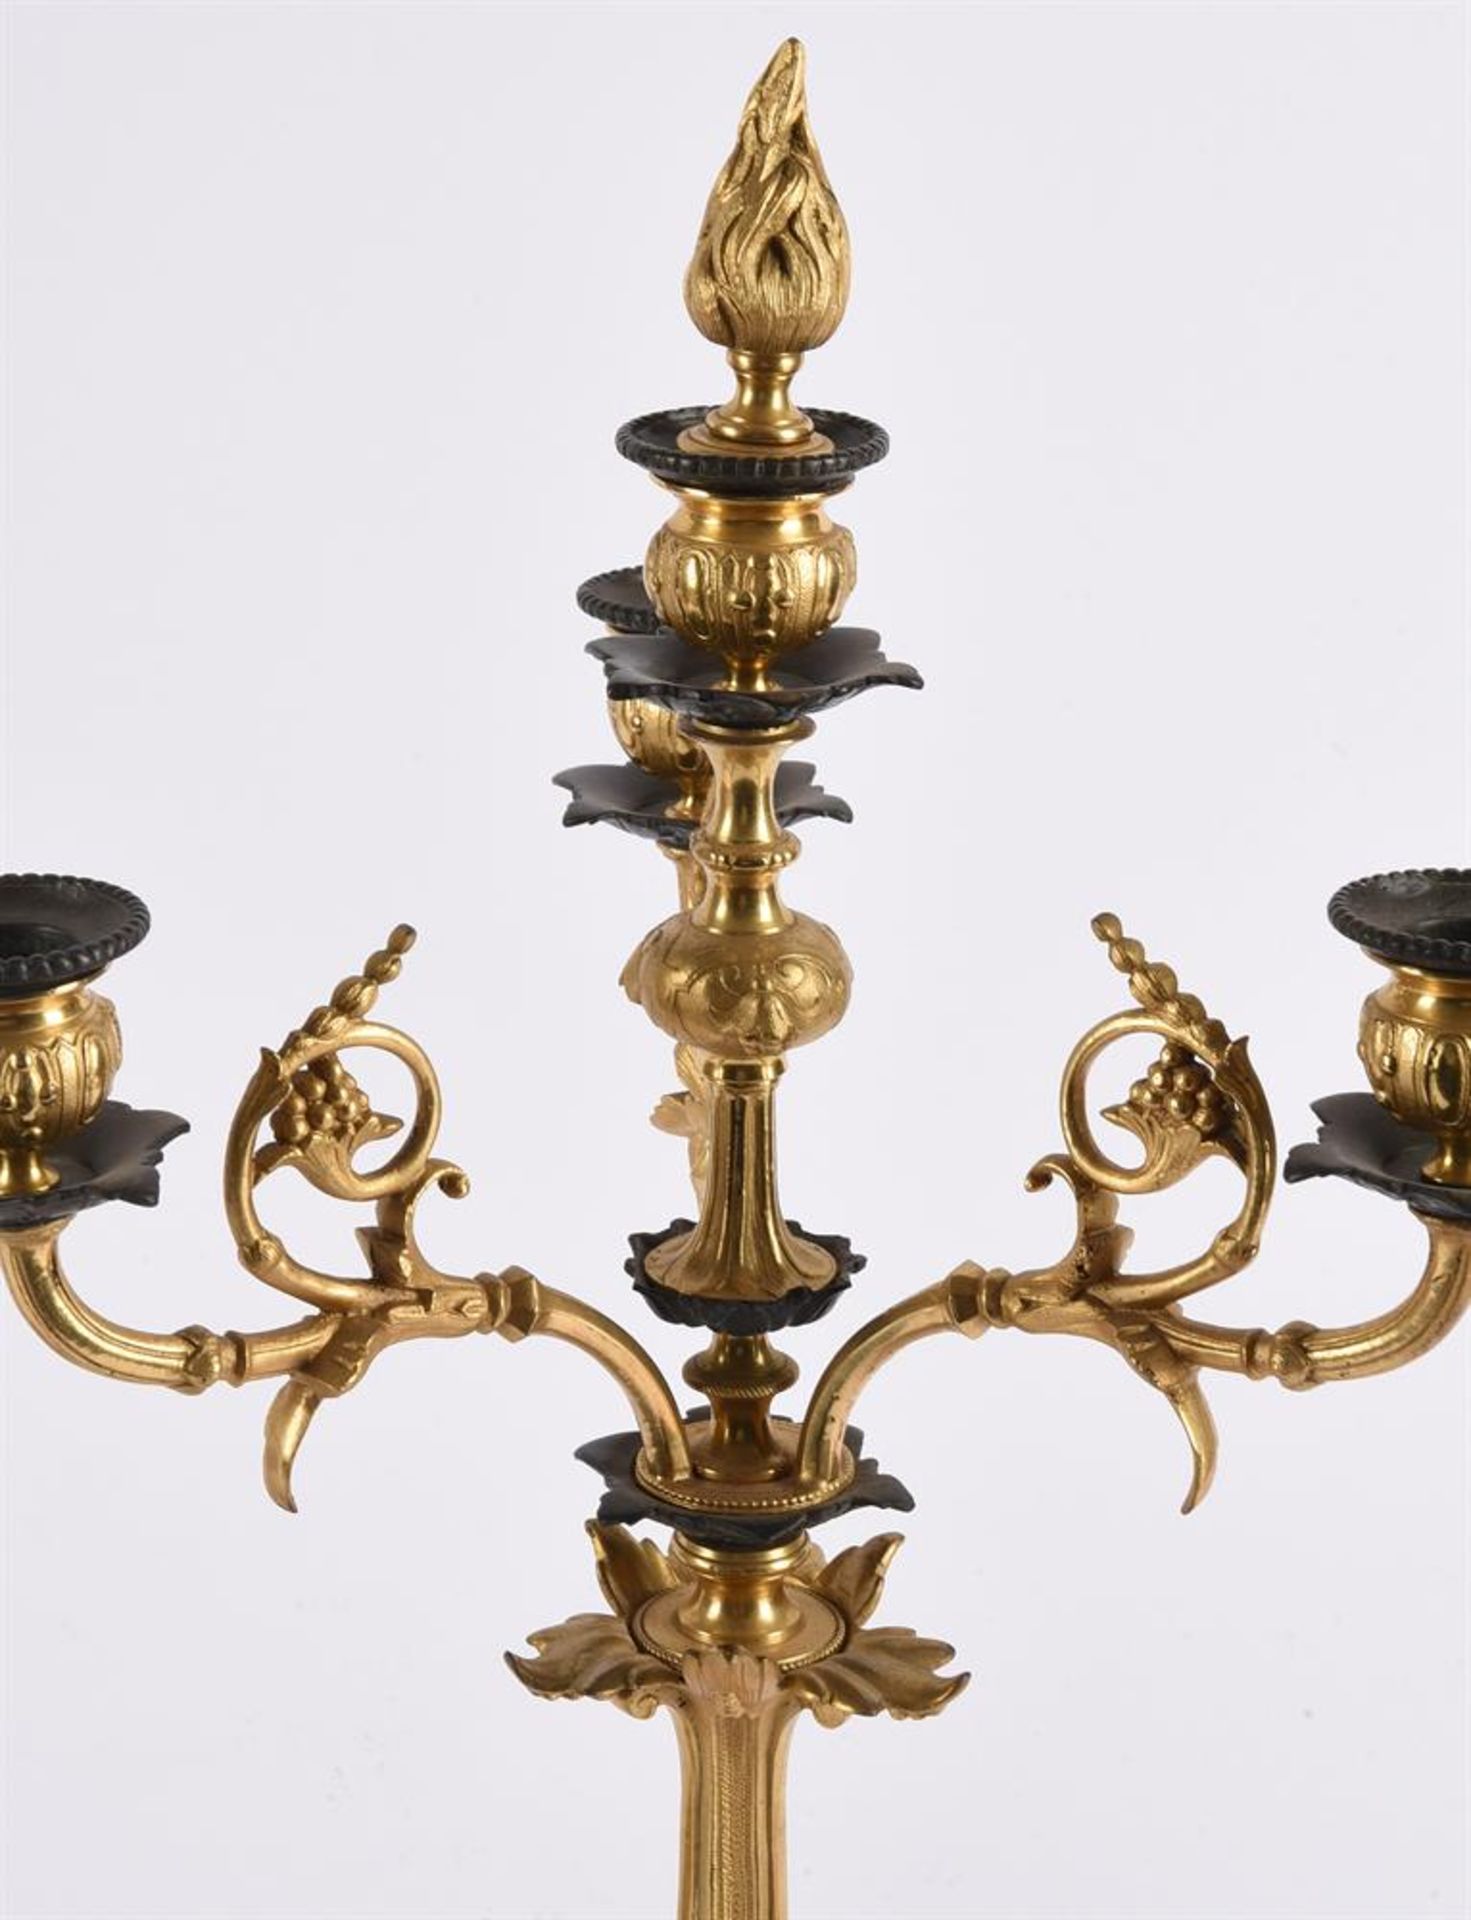 A PAIR OF FRENCH ORMOLU AND PATINATED FIVE LIGHT CANDELABRA, LATE 19TH OR EARLY 20TH CENTURY - Image 2 of 2